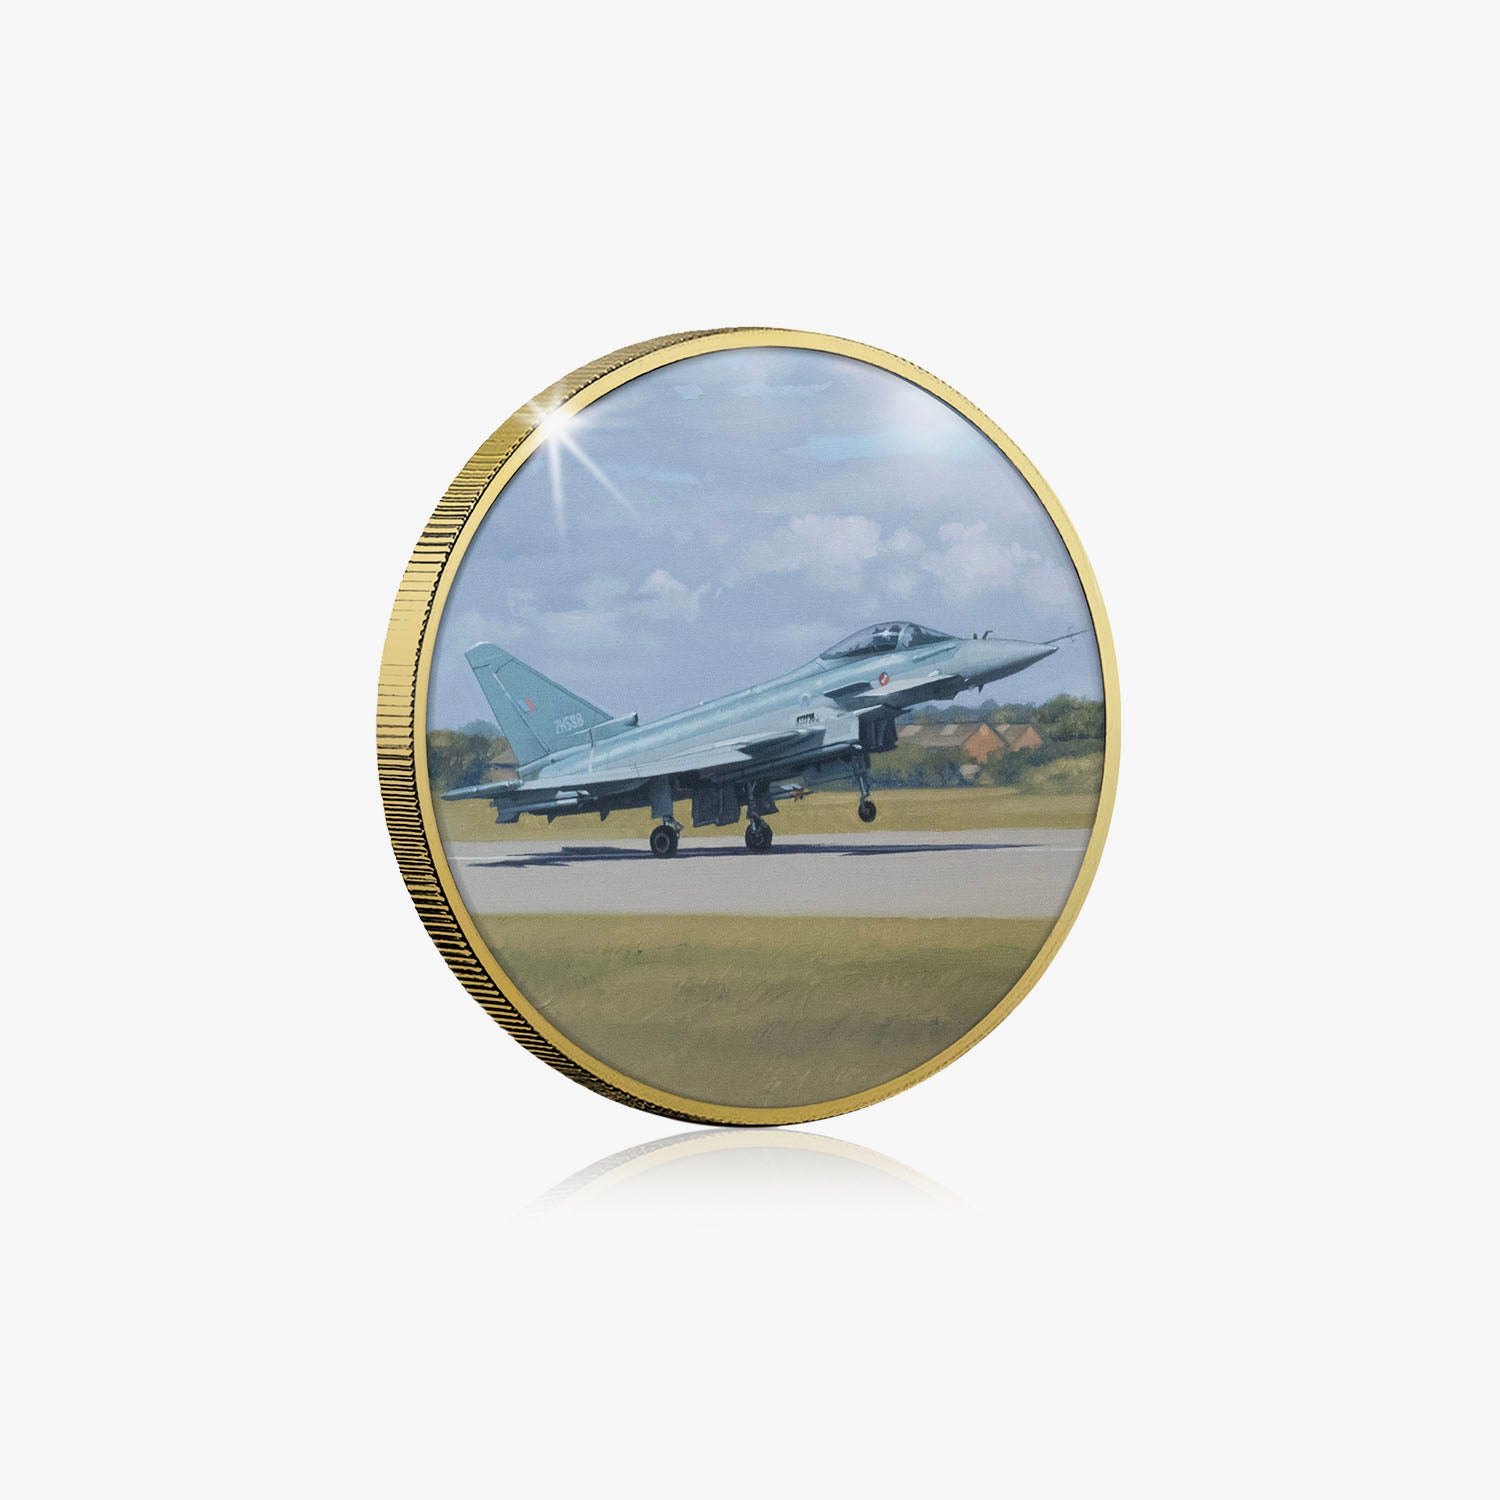 Ascent To The Skies Gold-Plated Commemorative